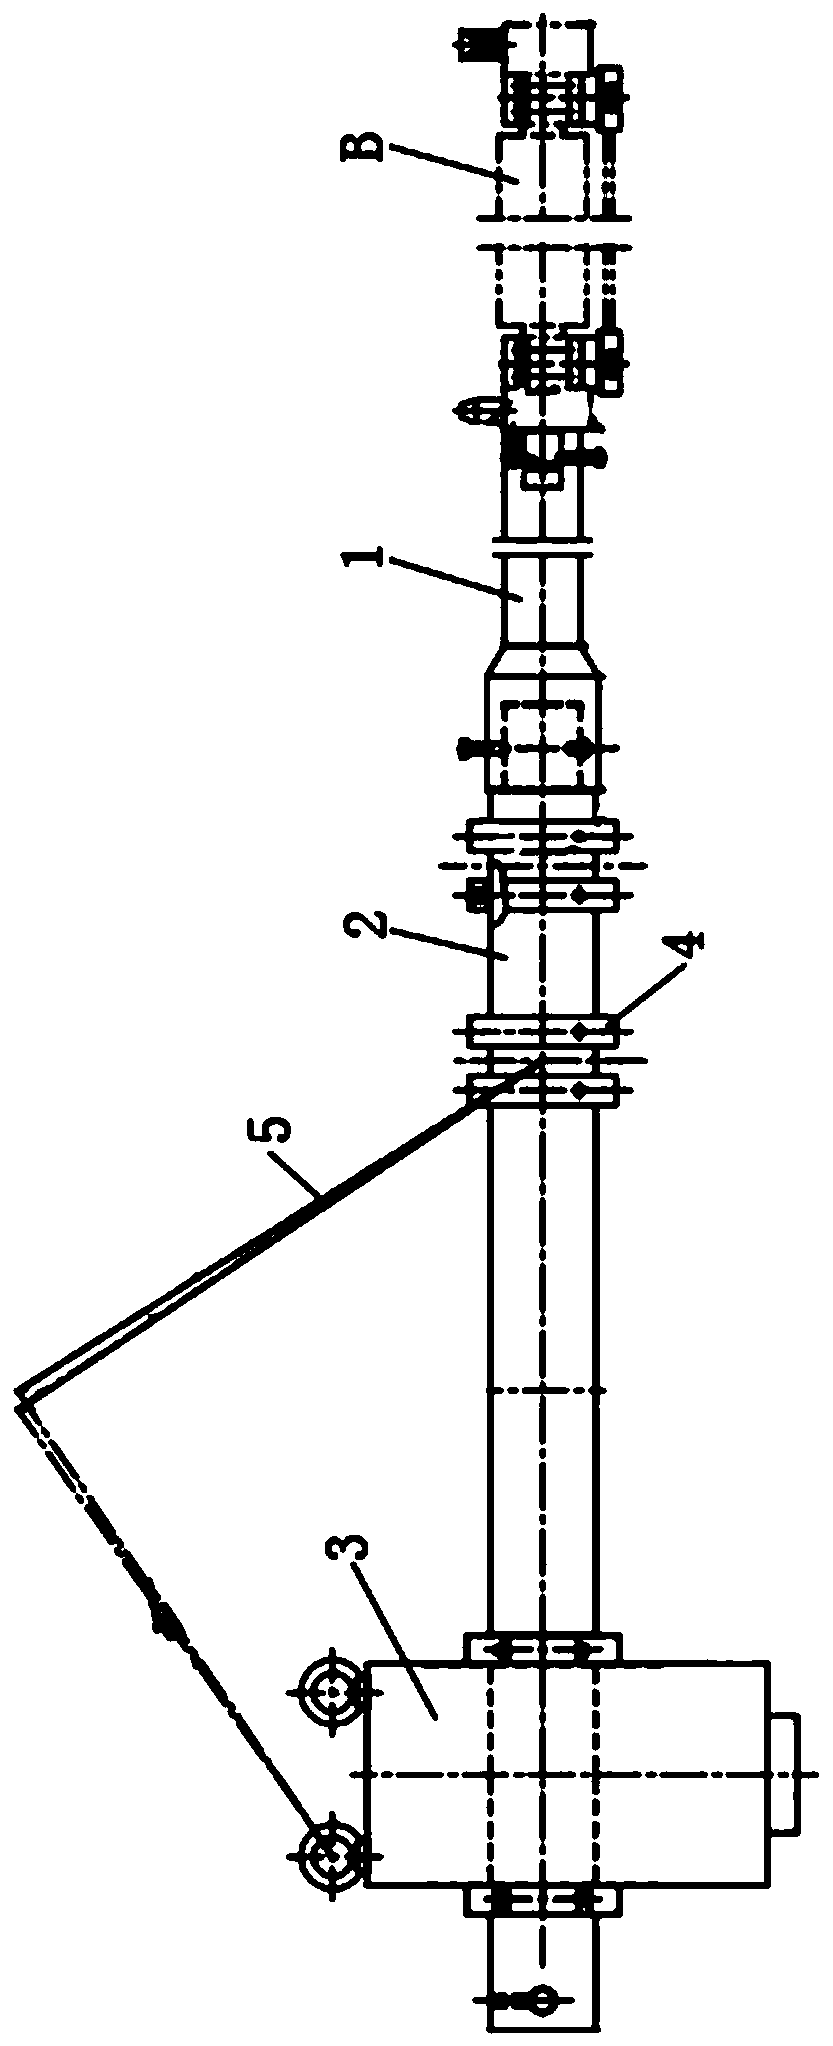 Oil scraping device